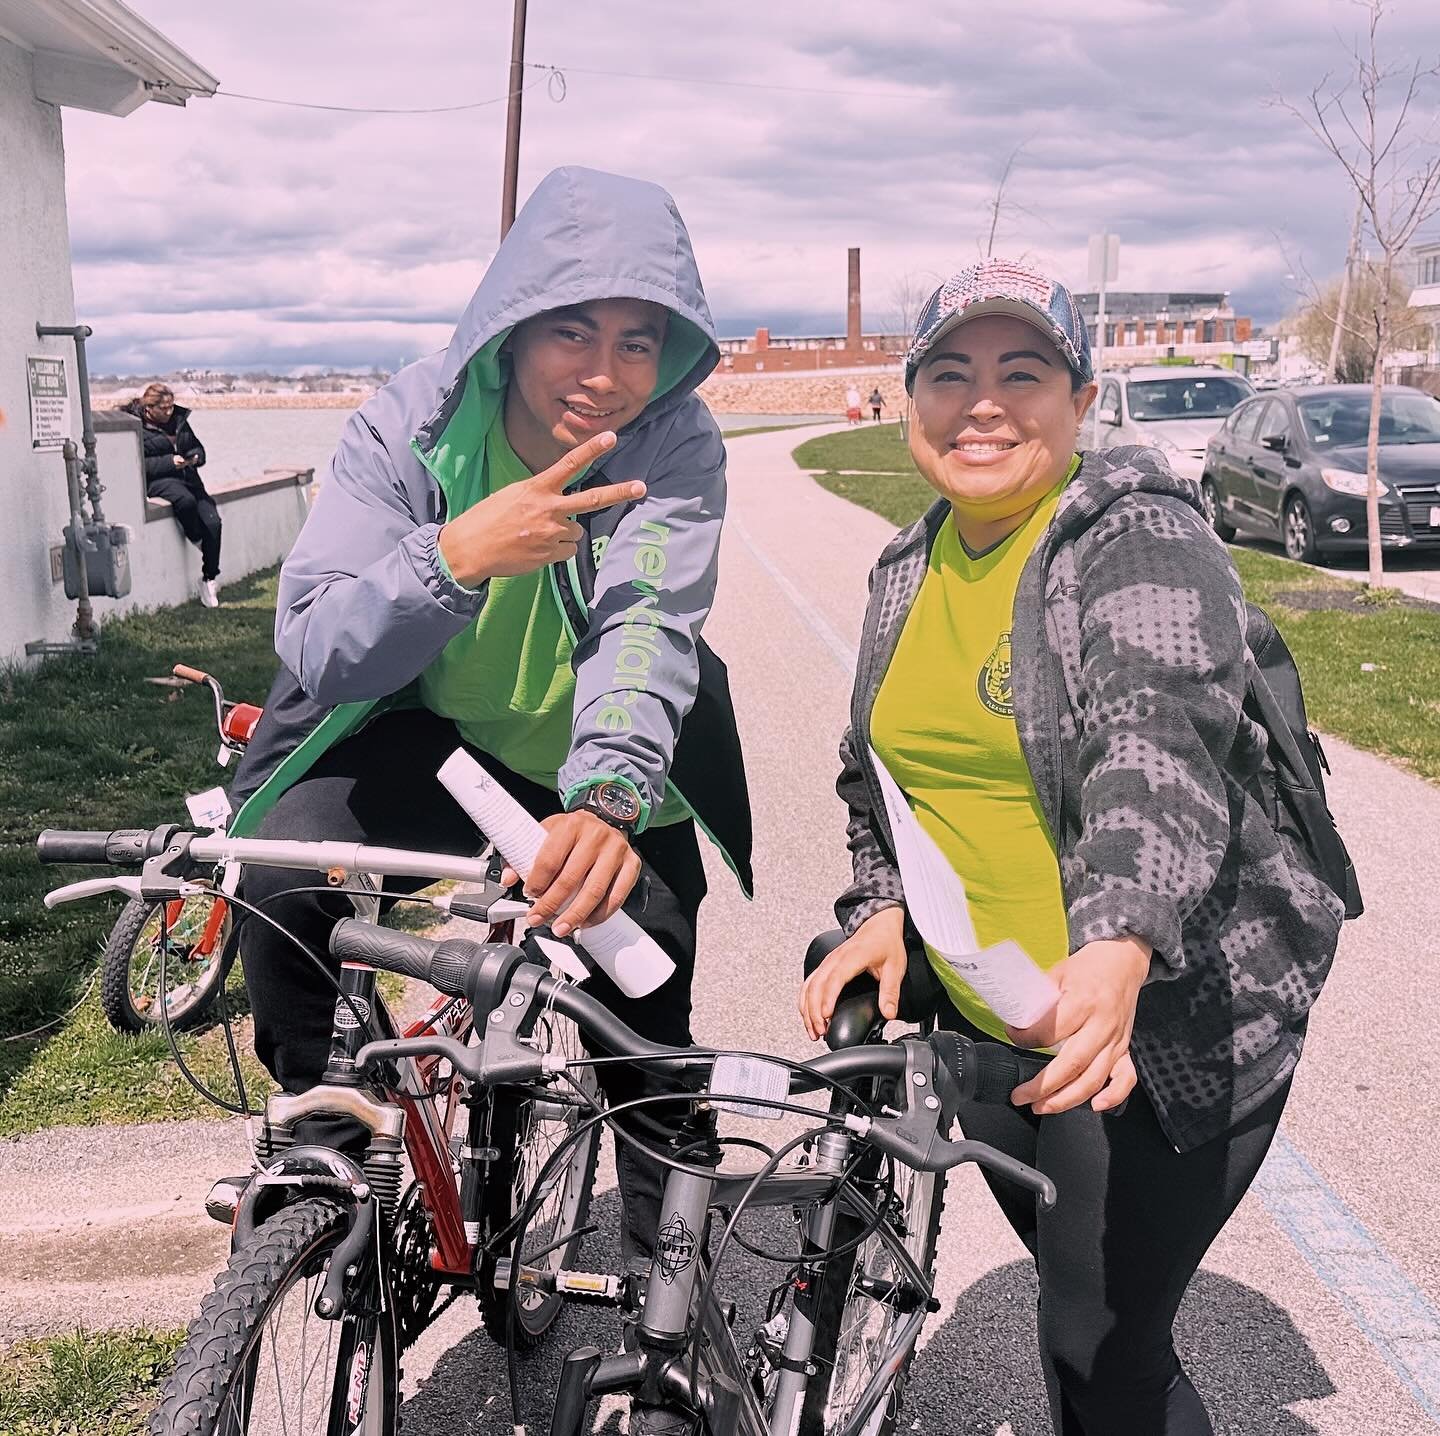 We&rsquo;ve teamed up with the Community Economic Development Center (CEDC) for another year to organize a bike giveaway at our Community Bike Shop, providing fully-maintained adult and youth bikes to those in need of transportation. Each participant